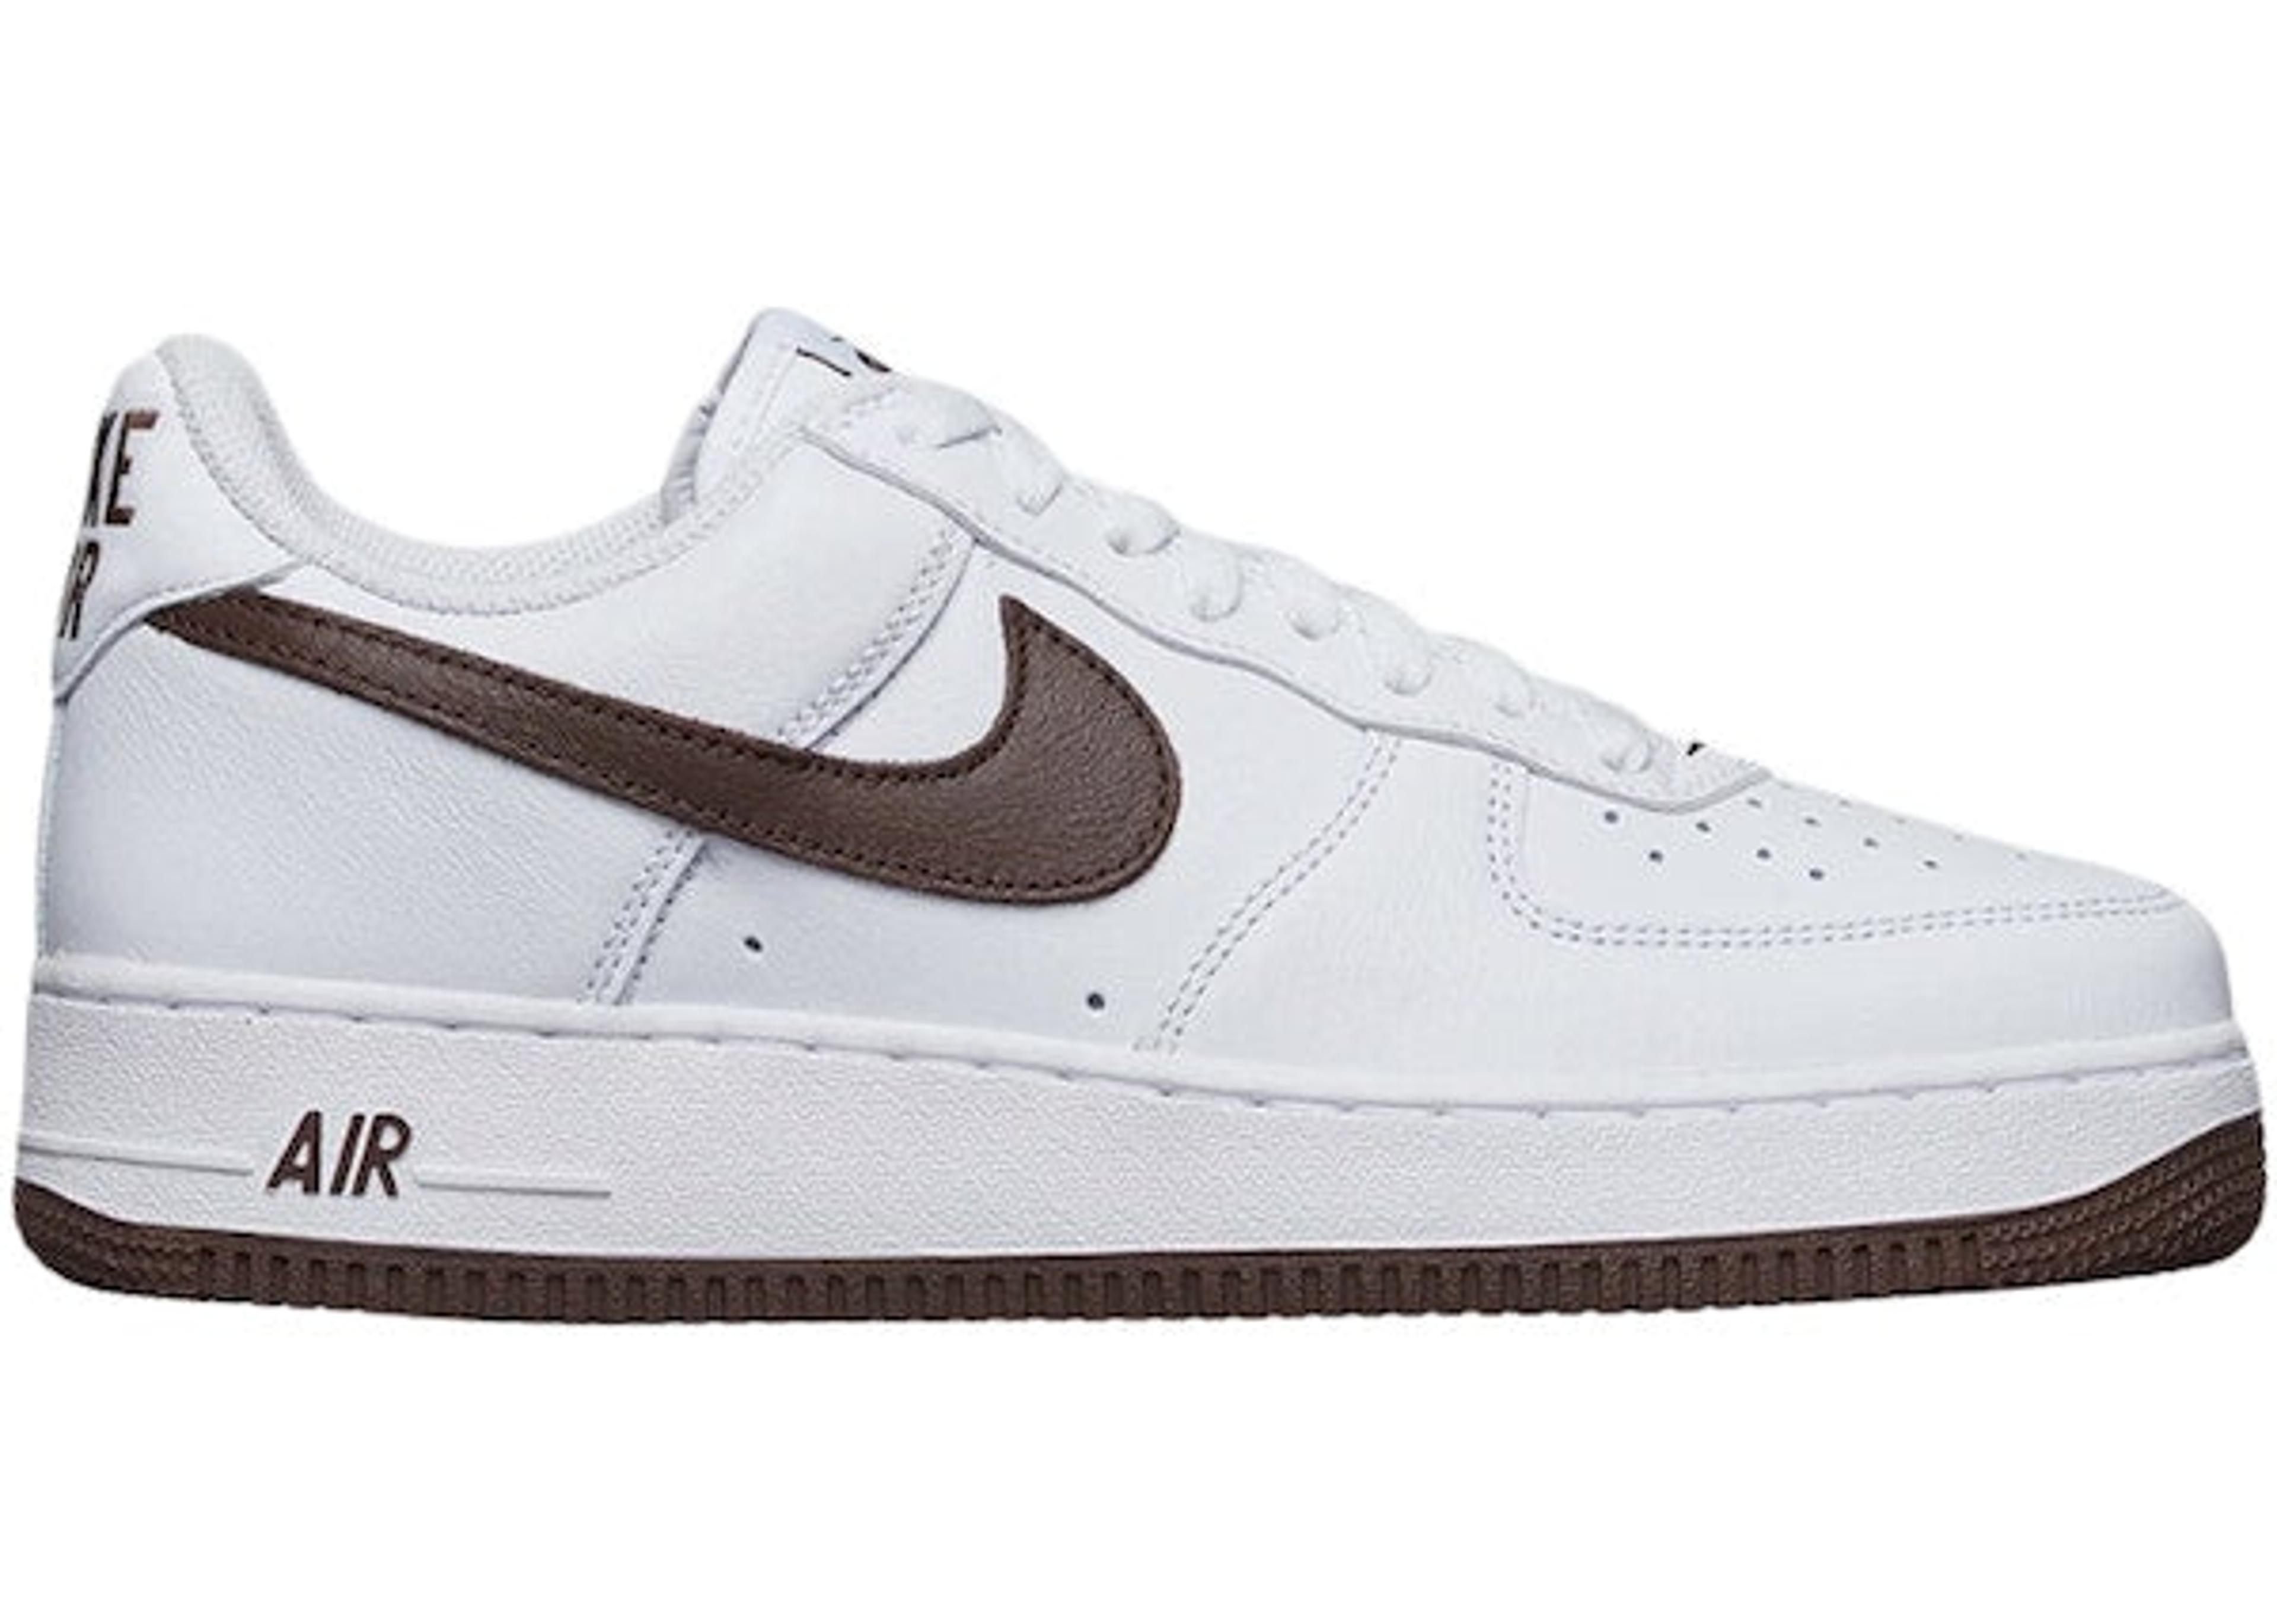 Nike Air Force 1 '07 Low Color of the Month White Chocolate (202